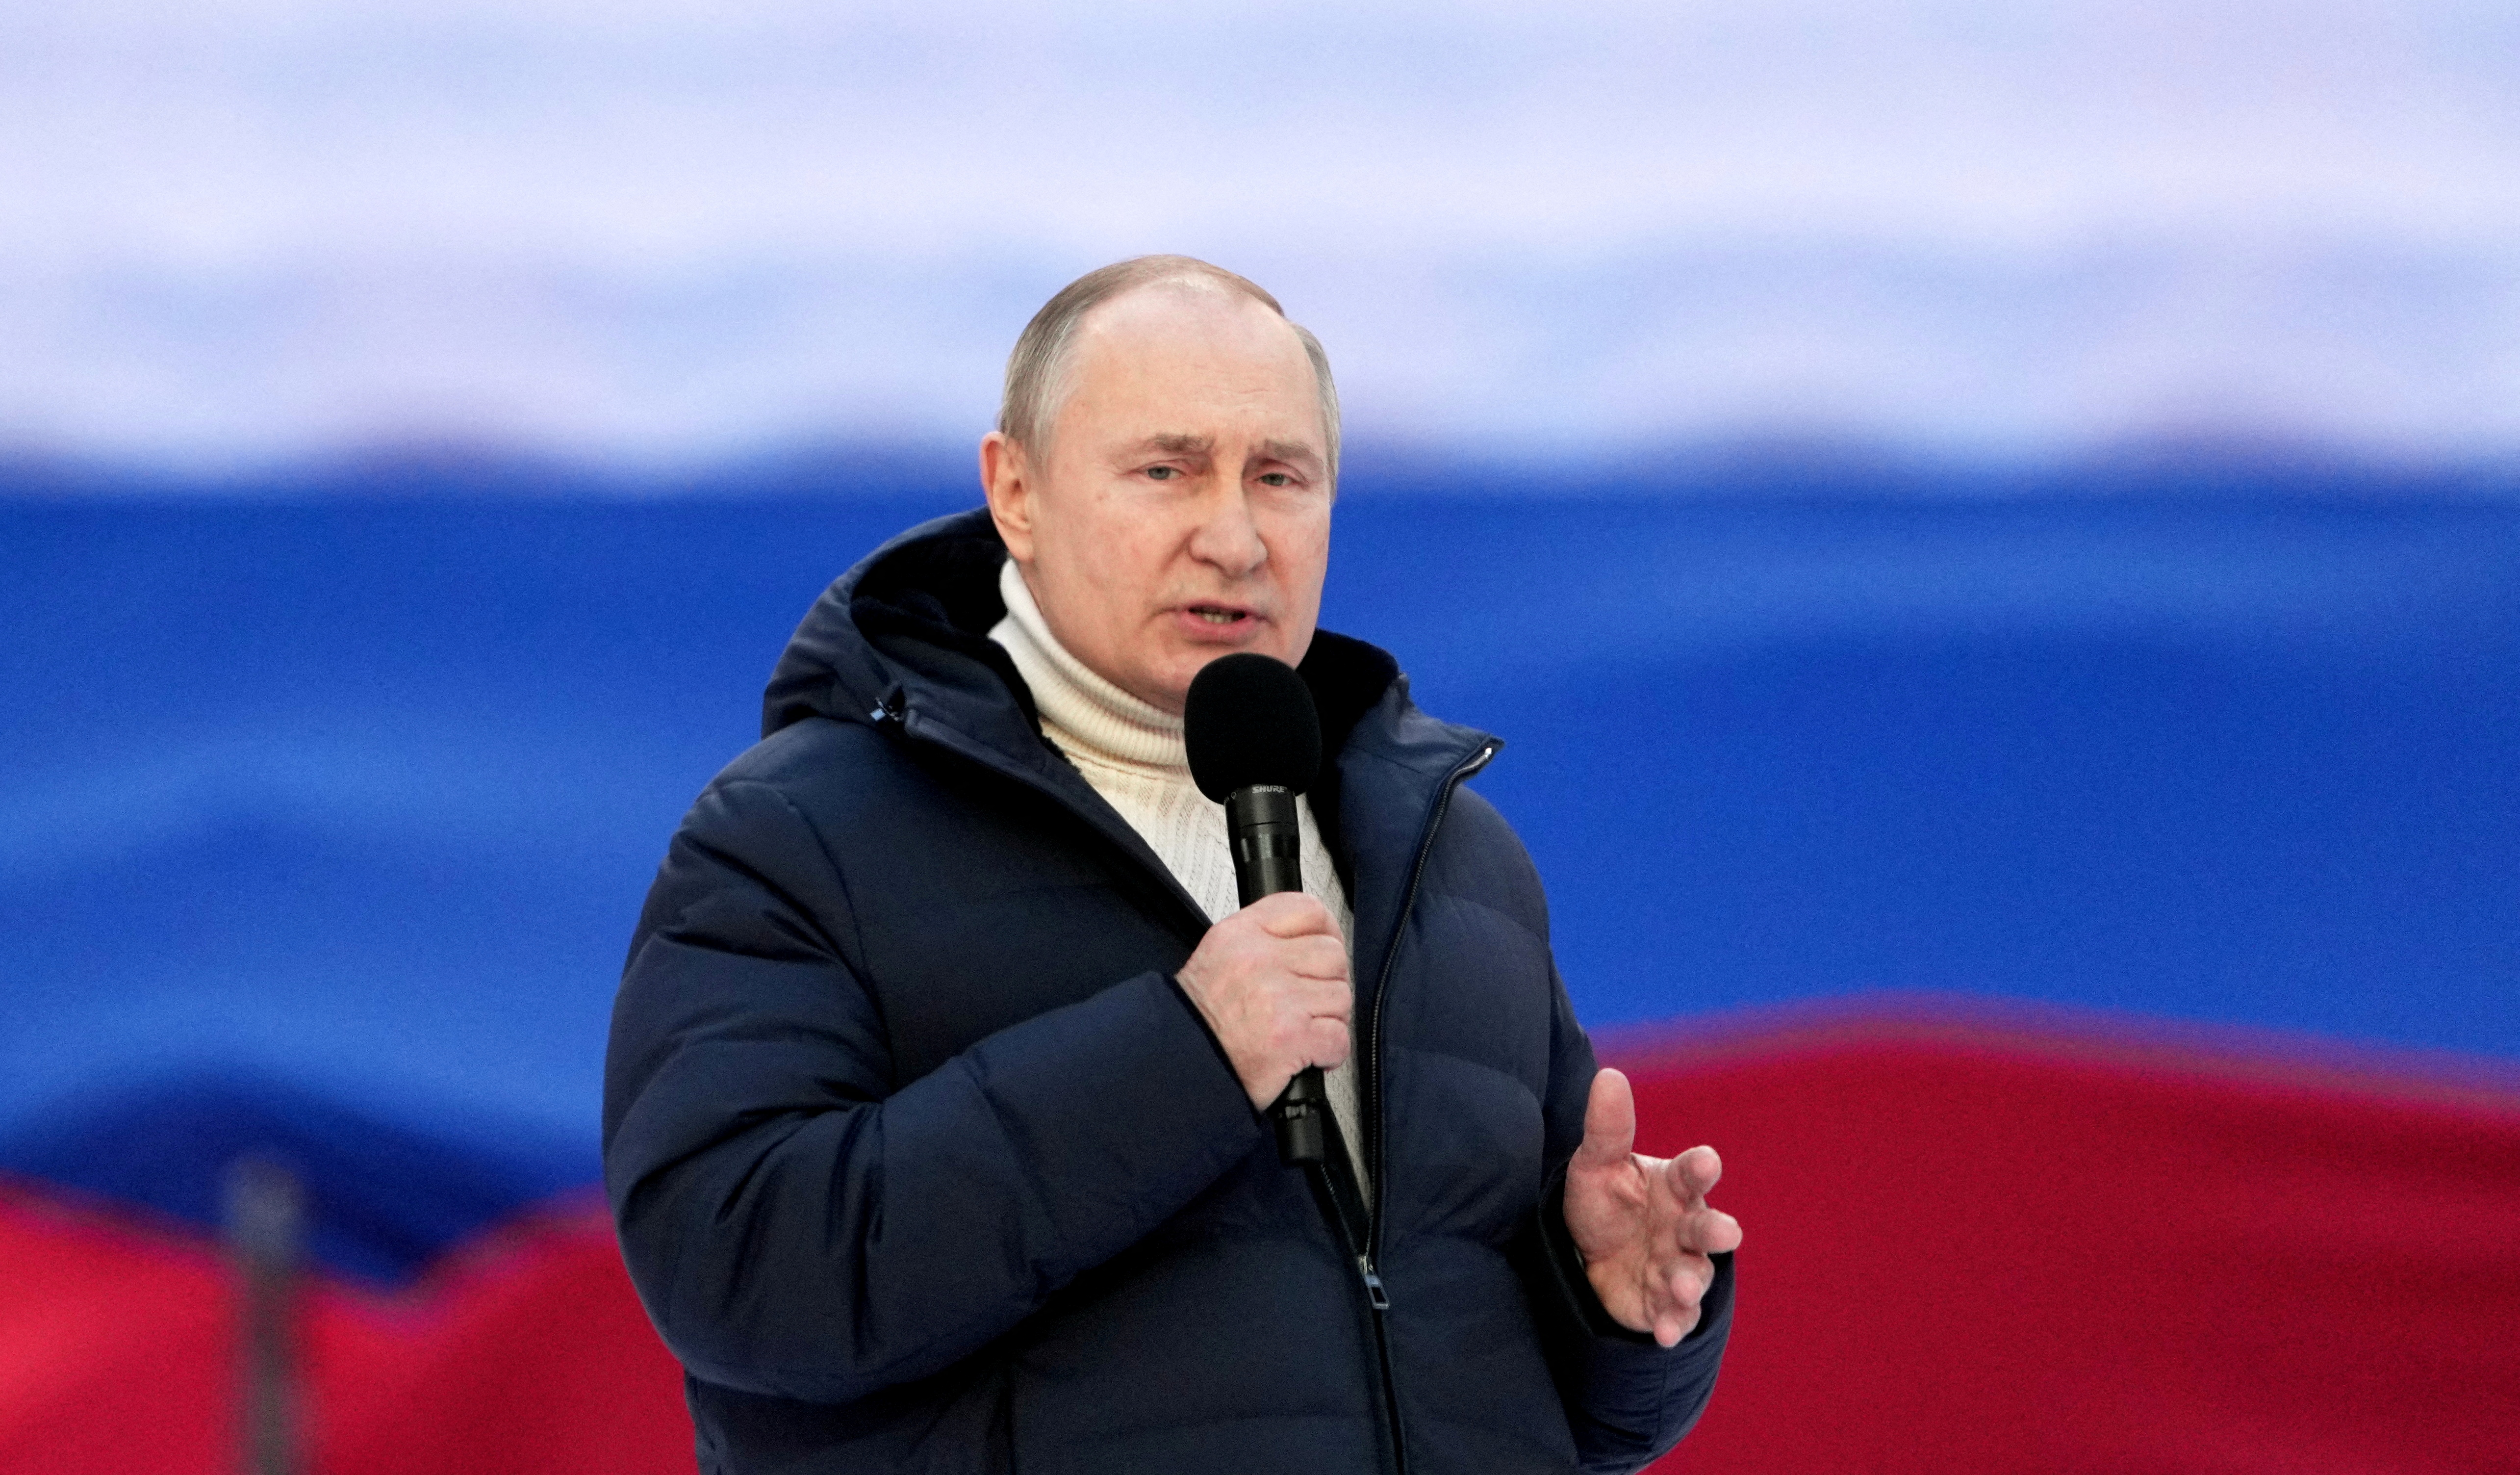 FILE PHOTO: Russian President Vladimir Putin delivers a speech during a concert marking the eighth anniversary of Russia's annexation of Crimea at Luzhniki Stadium in Moscow, Russia March 18, 2022. RIA Novosti Host Photo Agency/Alexander Vilf via REUTERS/File Photo